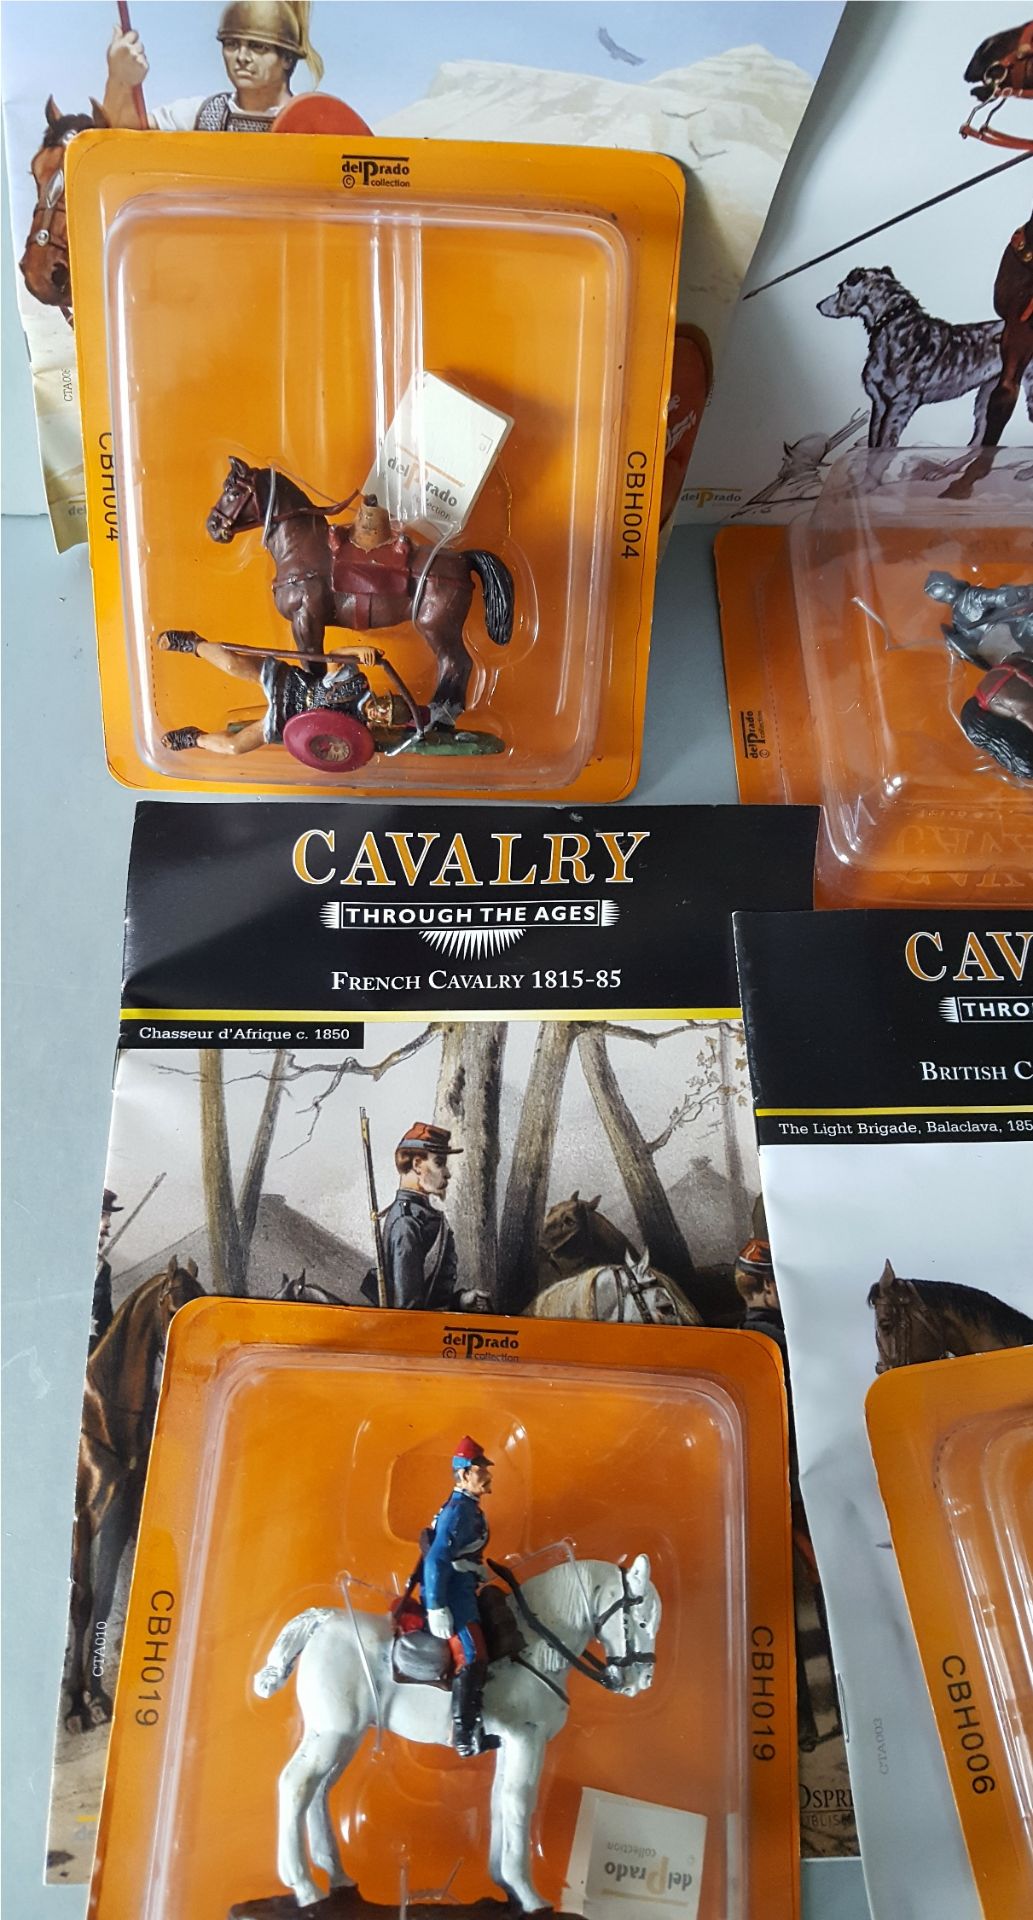 Collectable 6 Del Prado Cavalry Through The Ages Figures & Magazines - Image 4 of 4